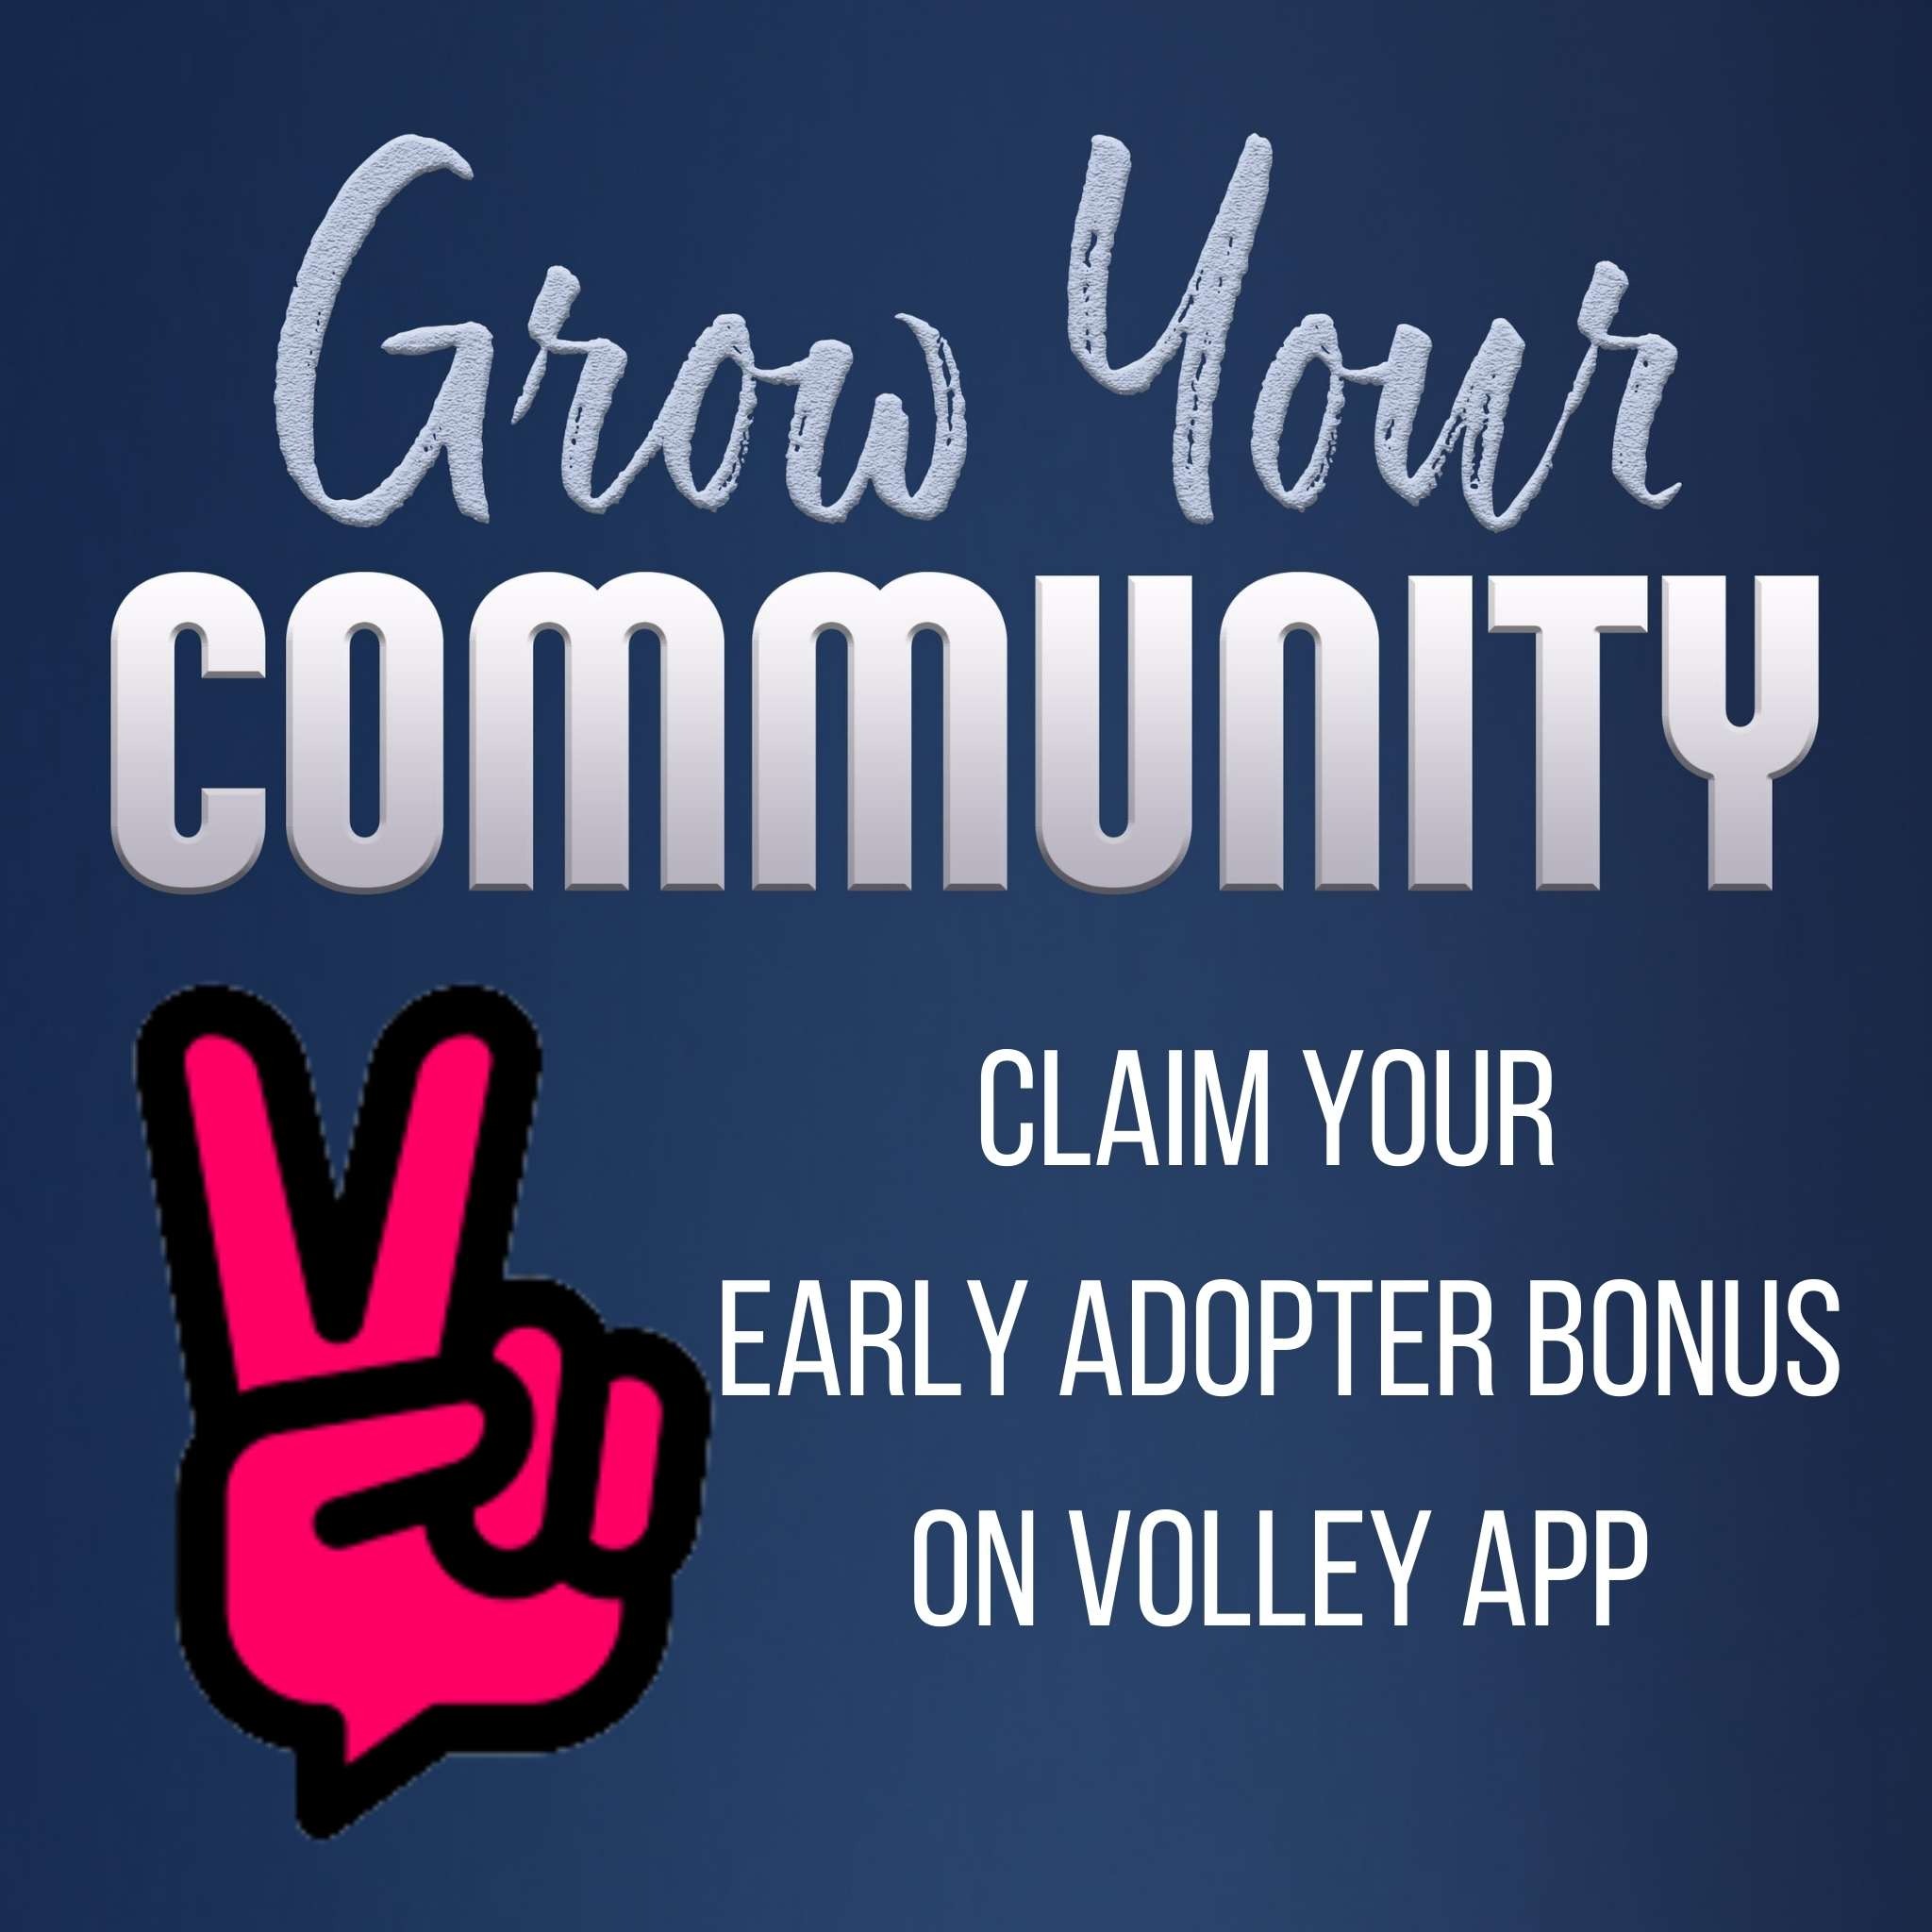 Claim Your Early Adopter Bonus on Volley App Image